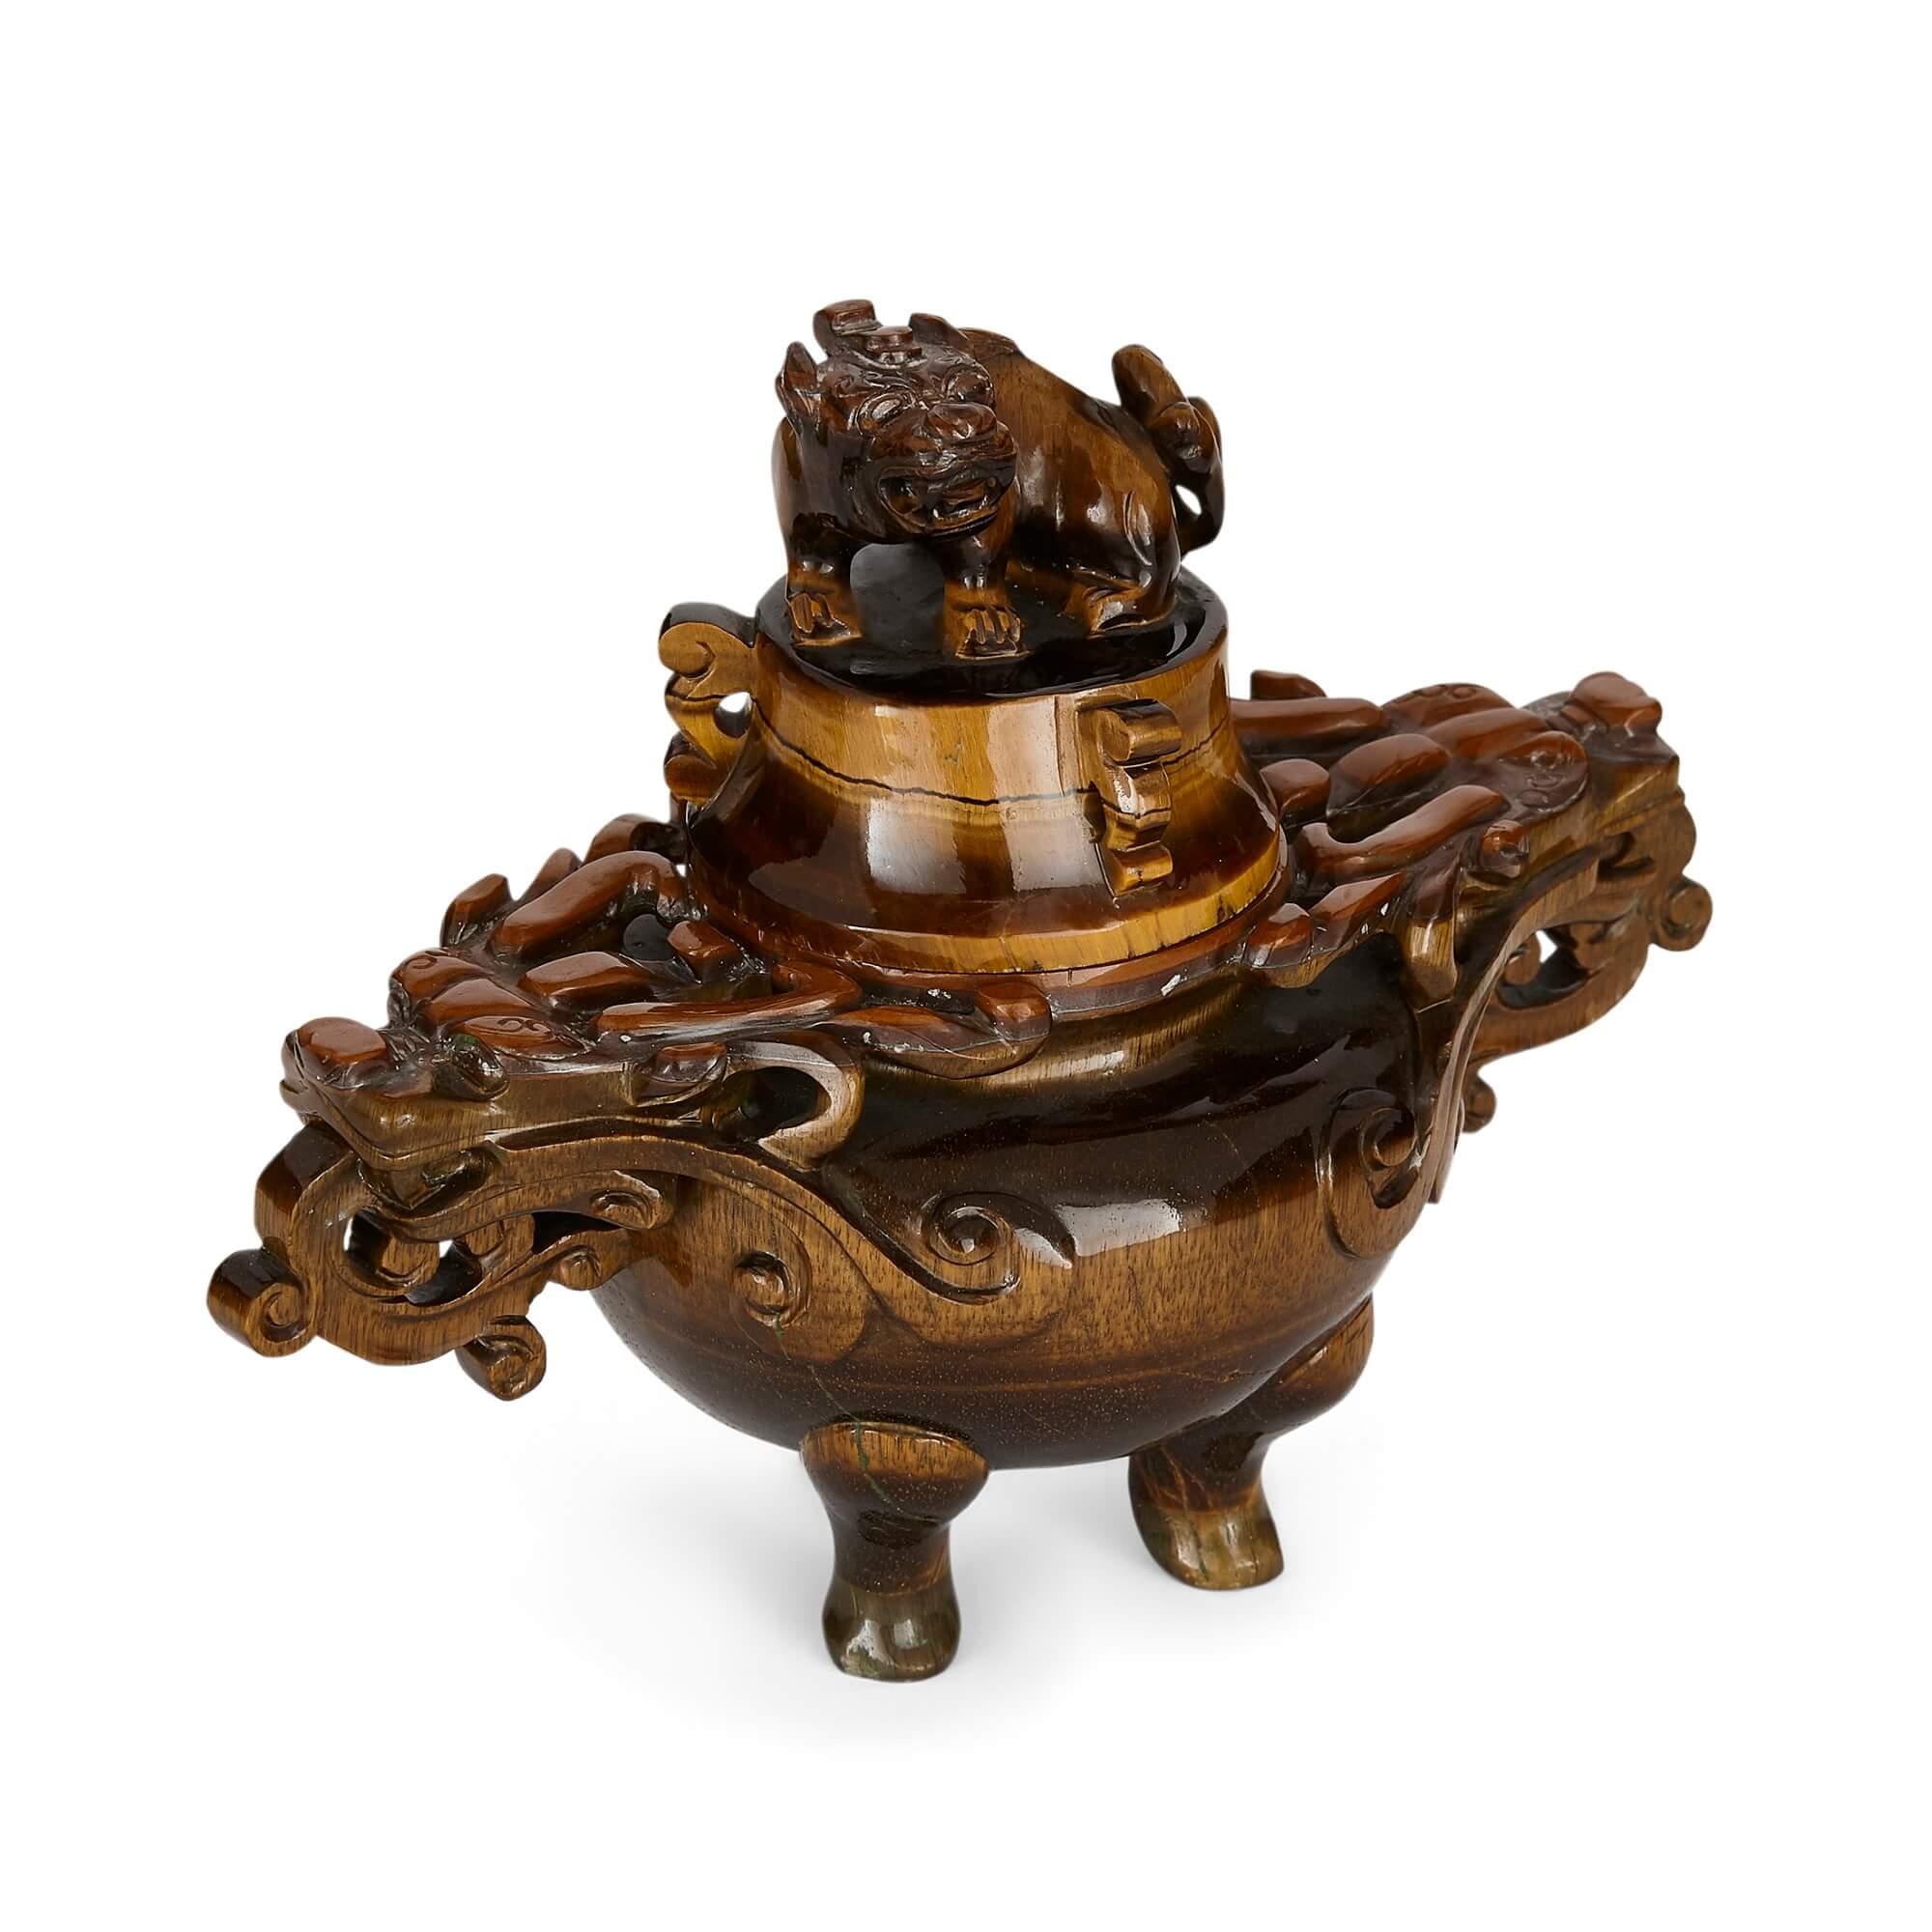 Traditional Chinese vase carved from tiger's eye
Chinese, early 20th century
Measures: Height 13cm, width 17cm, depth 9cm

This wonderful vase is crafted in a traditional Chinese style from tiger’s eye, a lustrous golden-brown stone. The vase